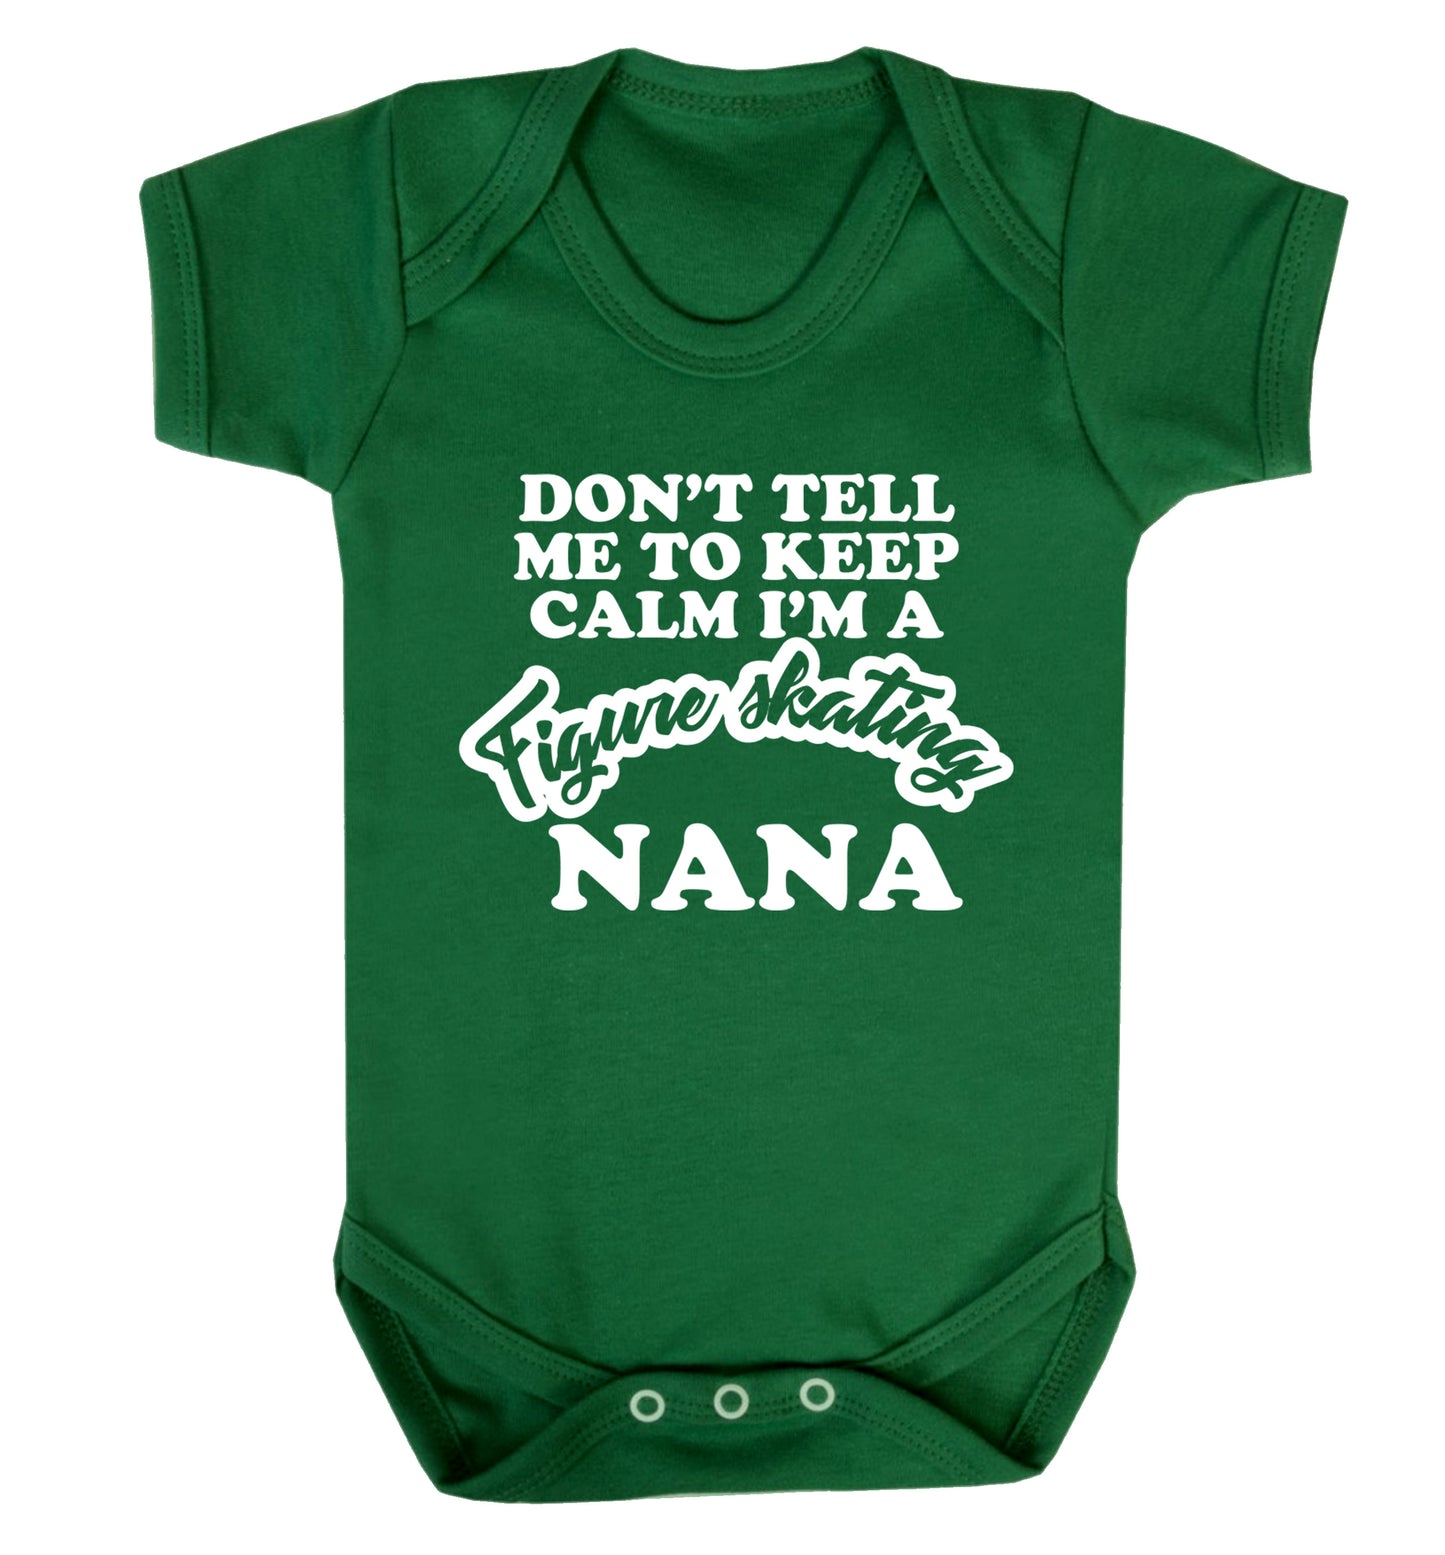 Don't tell me to keep calm I'm a figure skating nana Baby Vest green 18-24 months